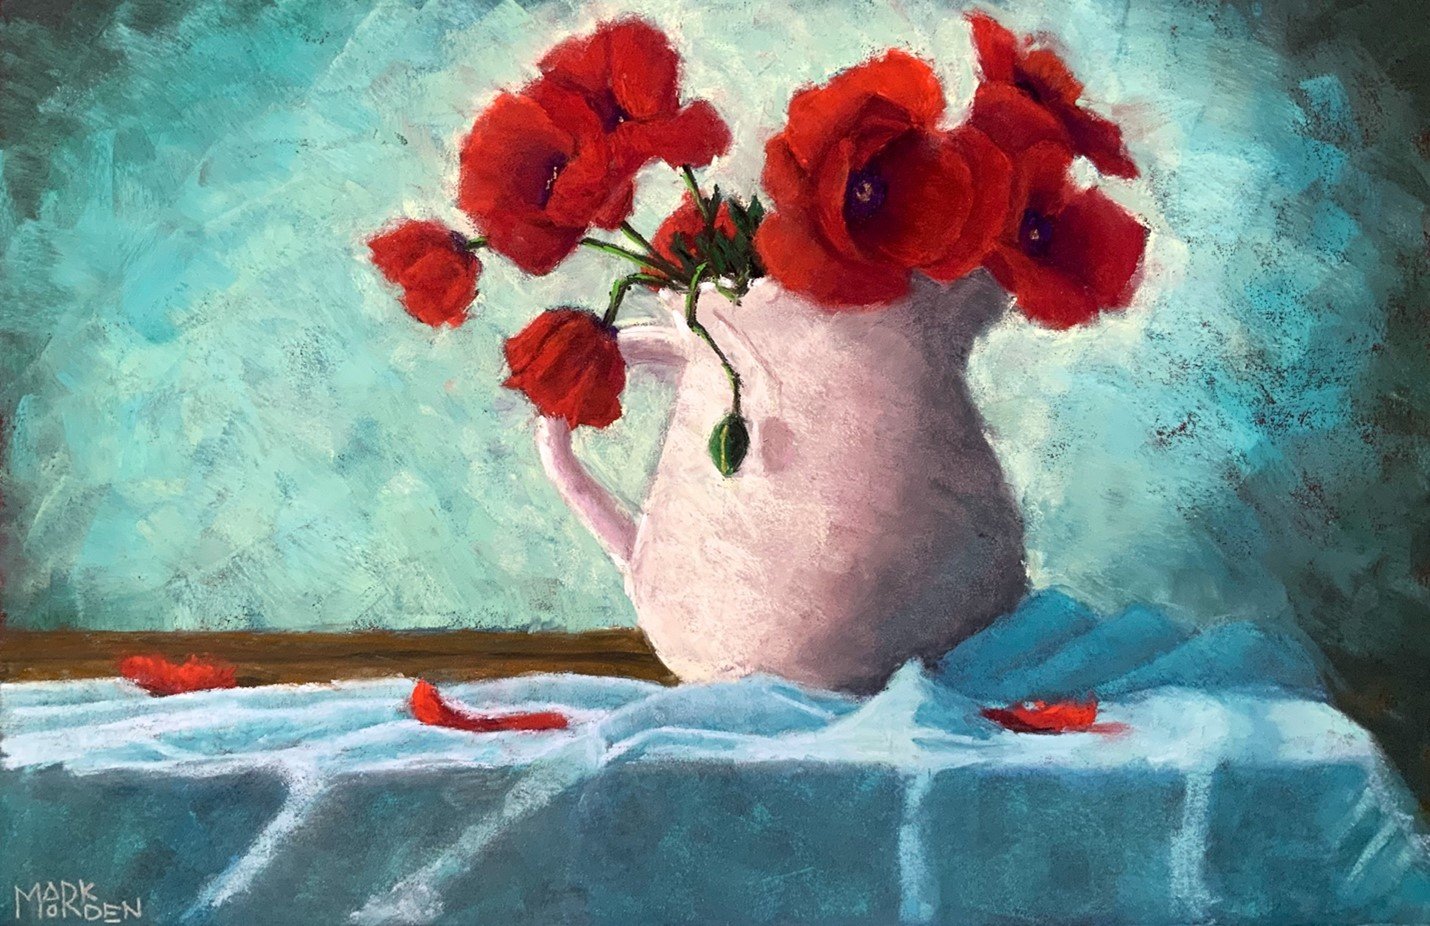 By A Pitcher of Poppies by Mark Morden